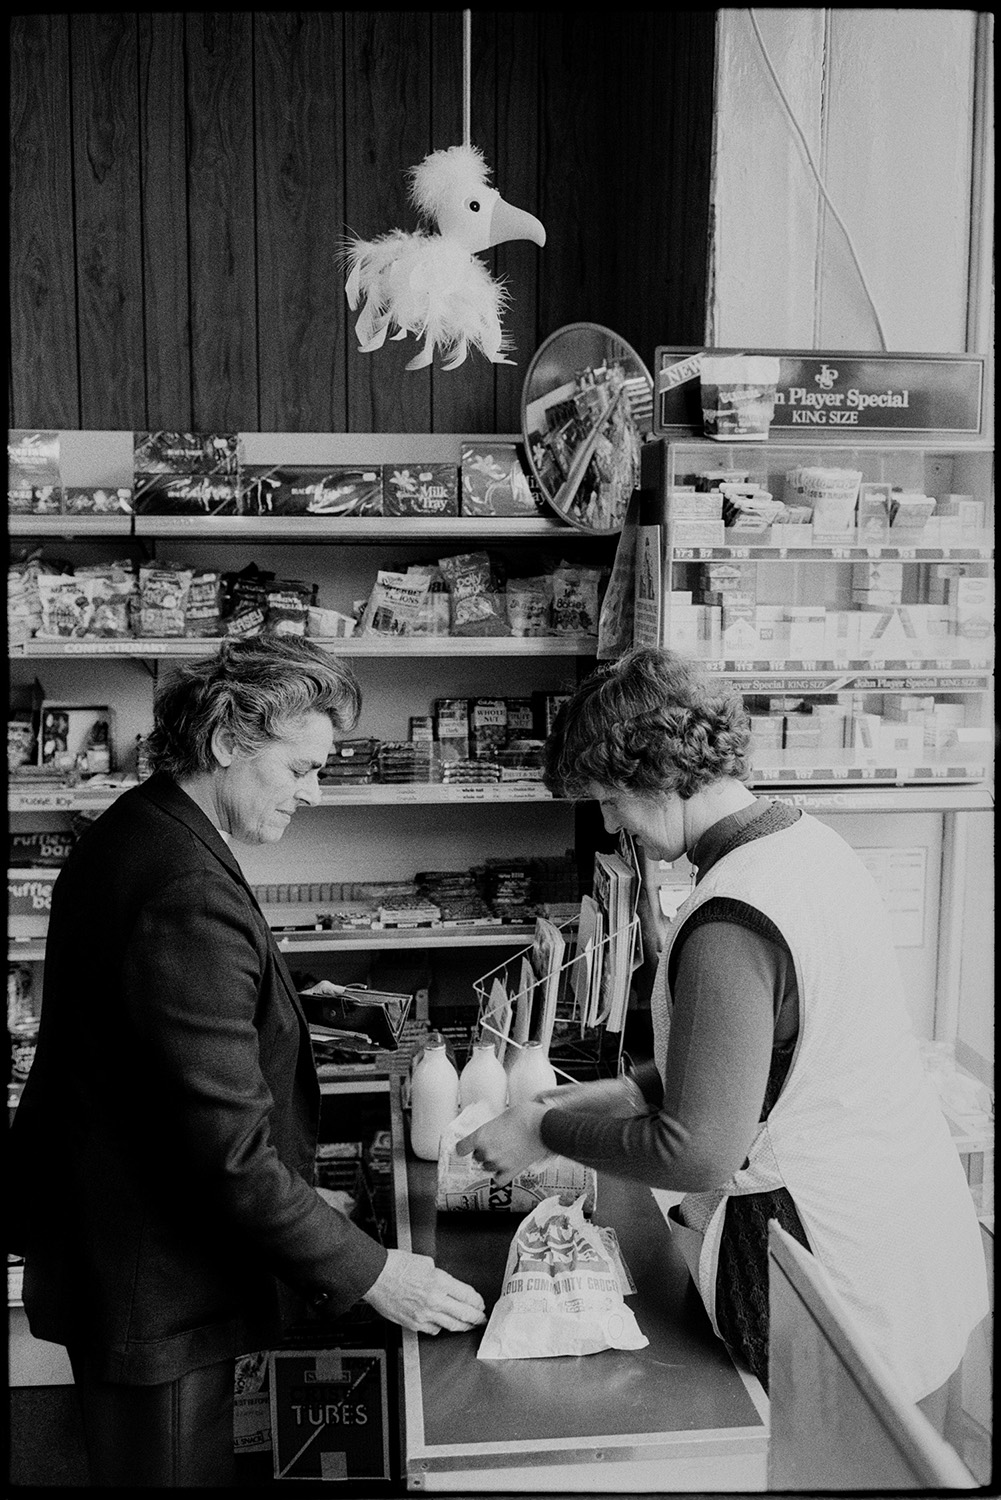 Shopkeepers in village store, customers, women buying at till.
[A woman paying for goods at the till in the village shop at Winkleigh. Sweets, soft drinks and cigarettes are on display on shelves. A fluffy bird is hanging from the ceiling and milk bottles are on the shop counter.]